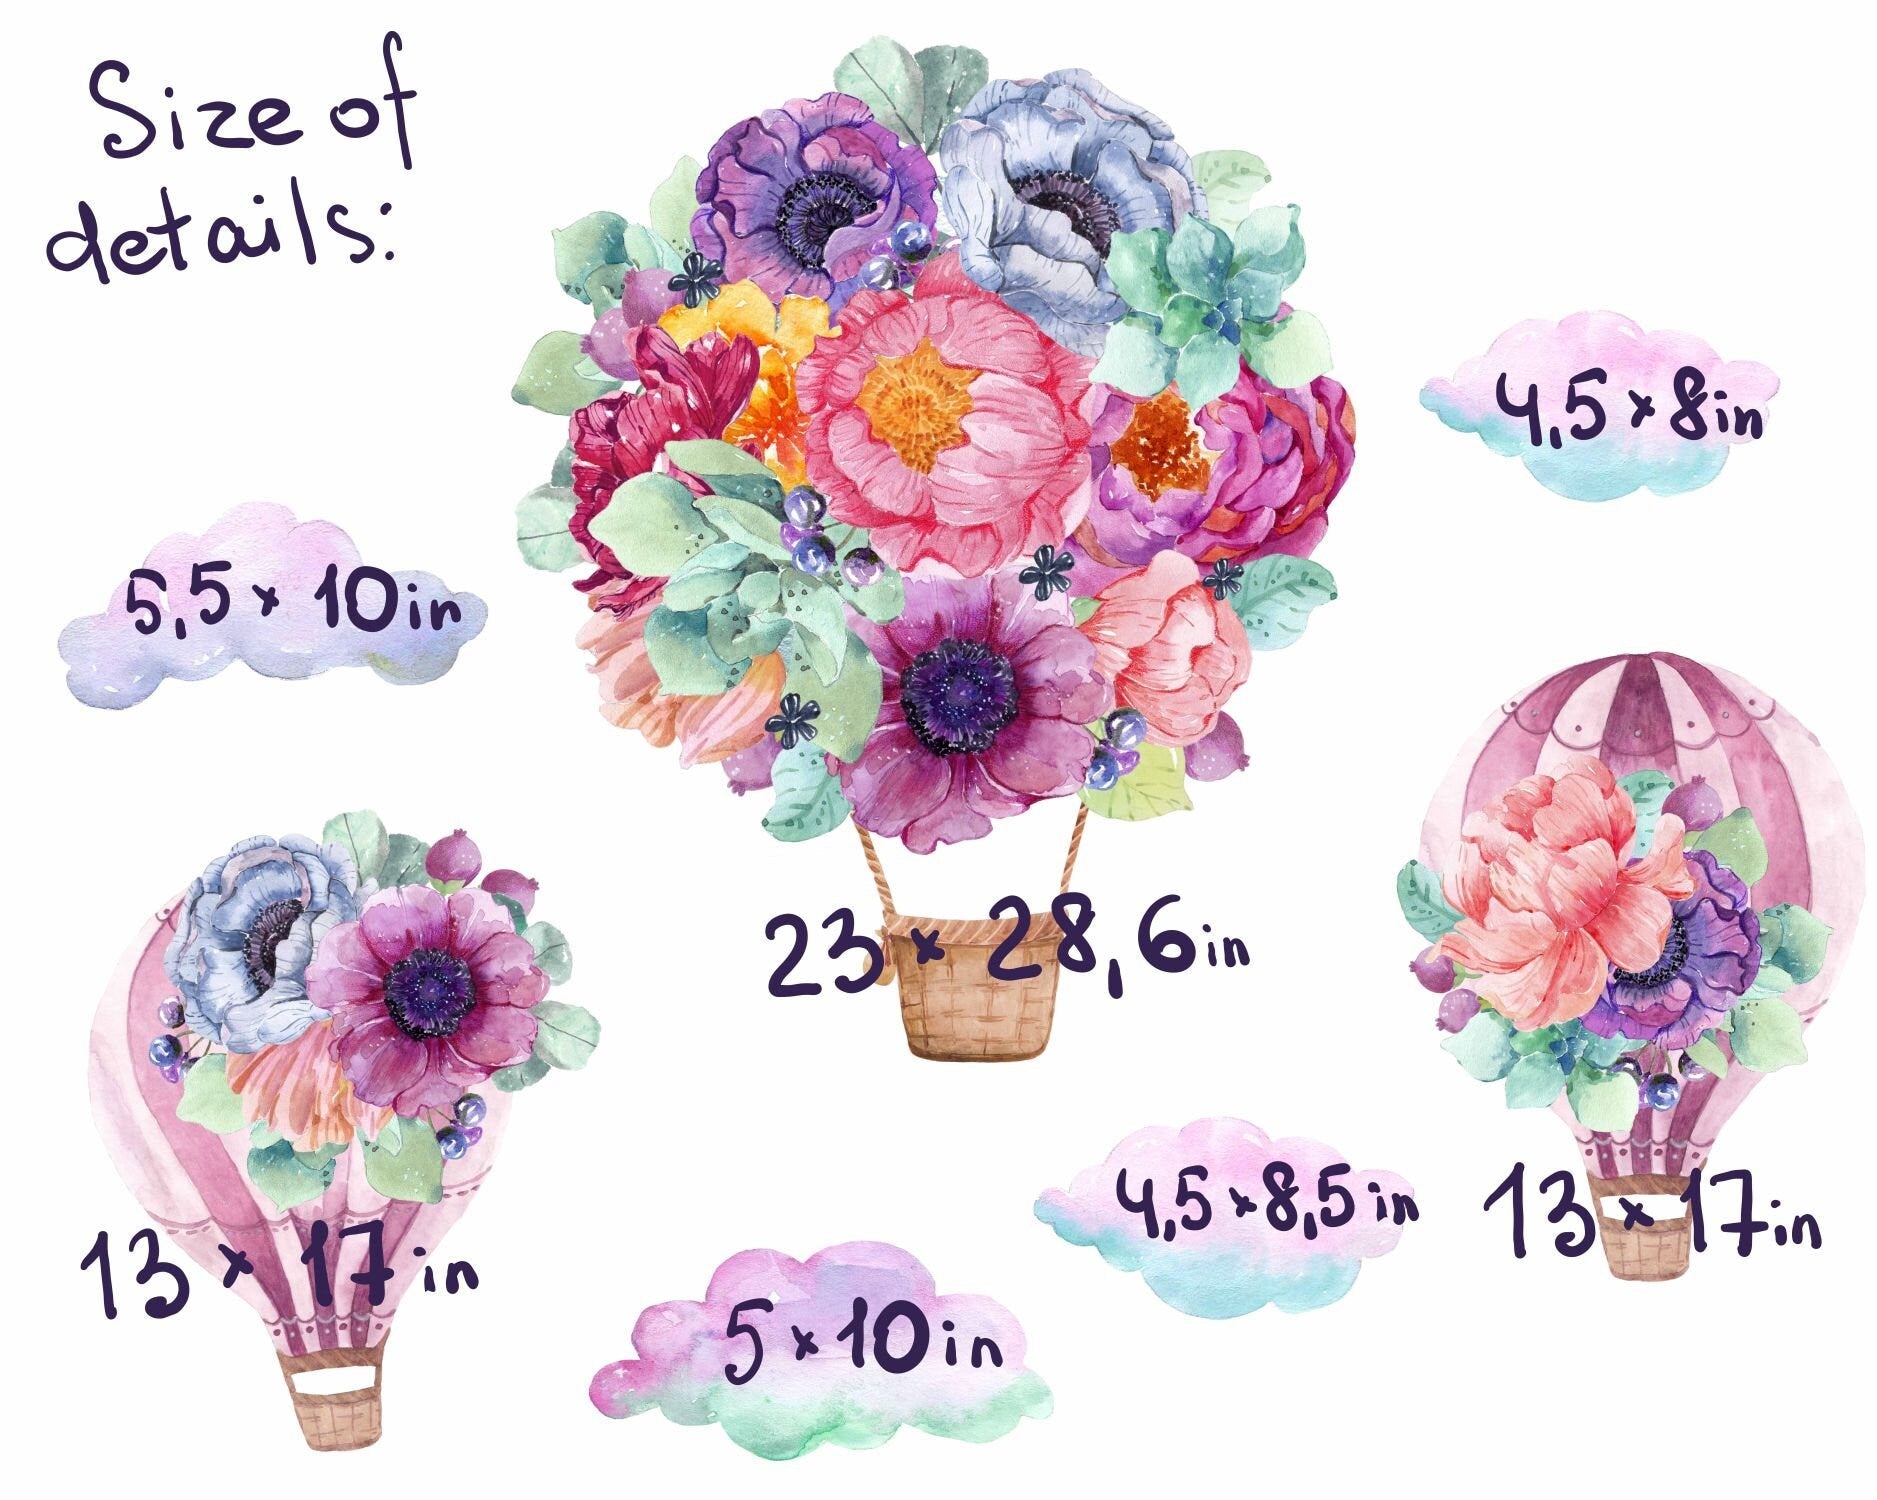 Hot Air Balloon Wall Decals Watercolor Flower Stickers, LF118